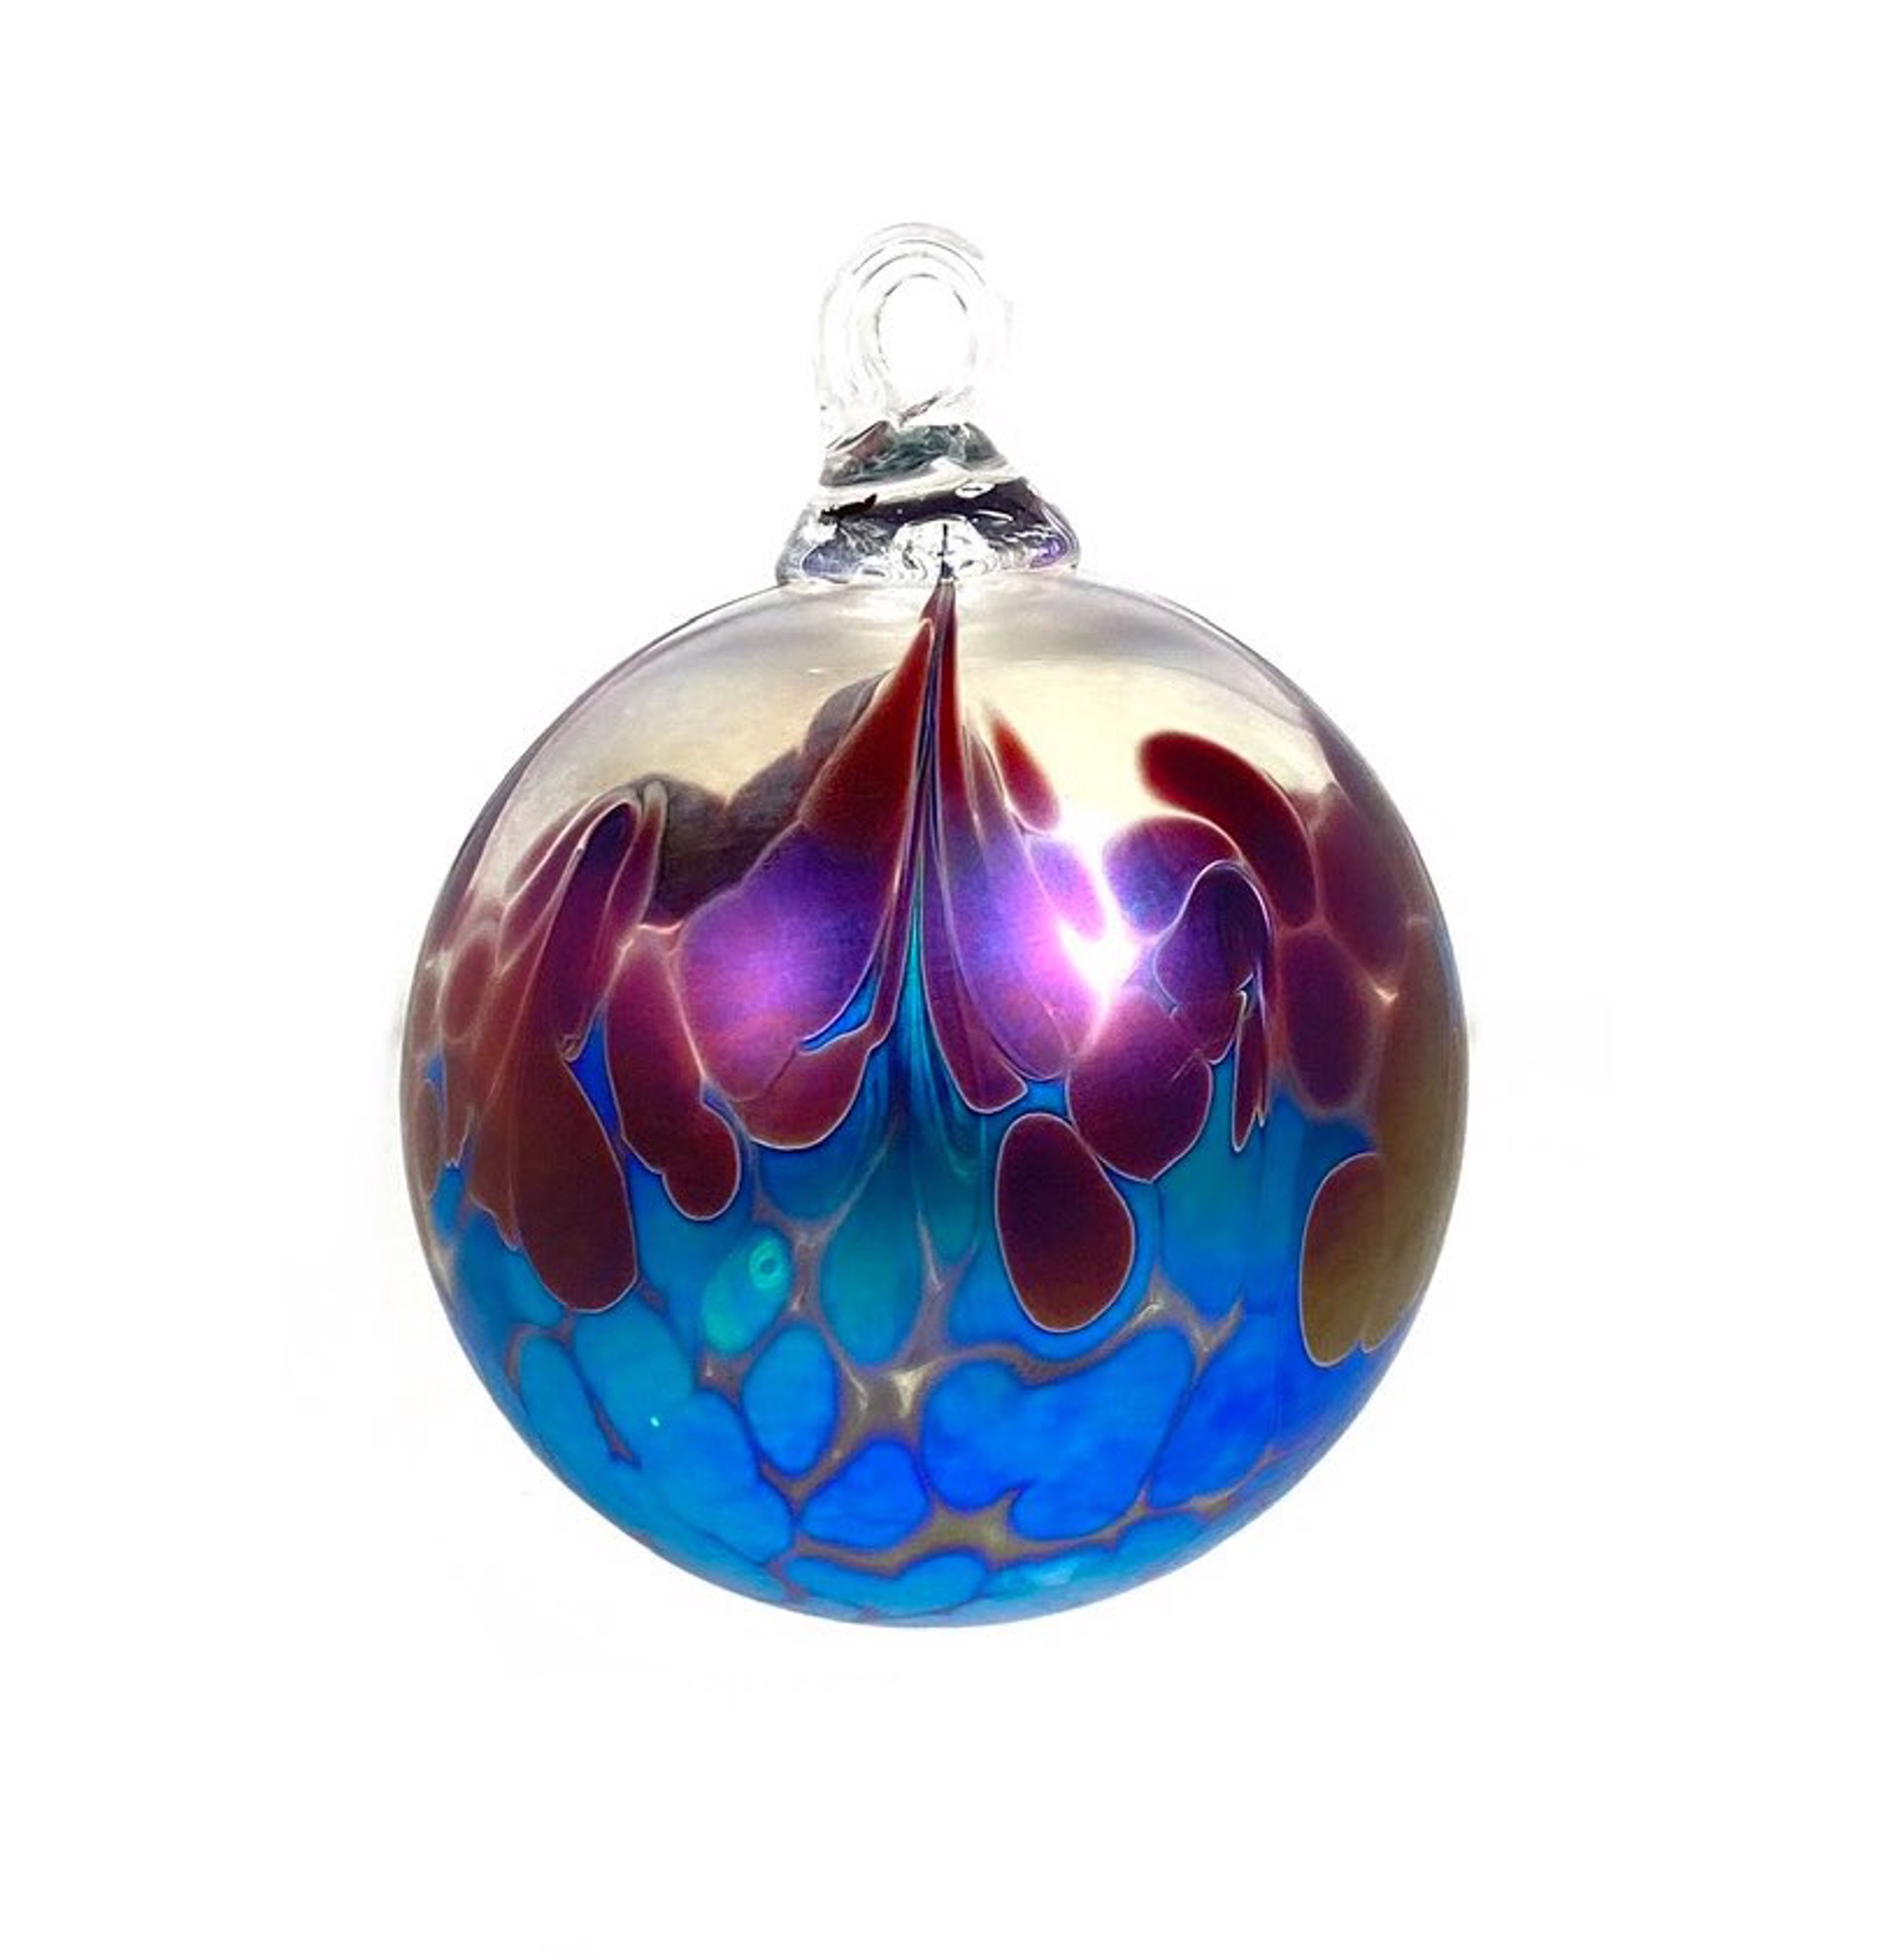 Artisan Peacock Ornament by Furnace Glass